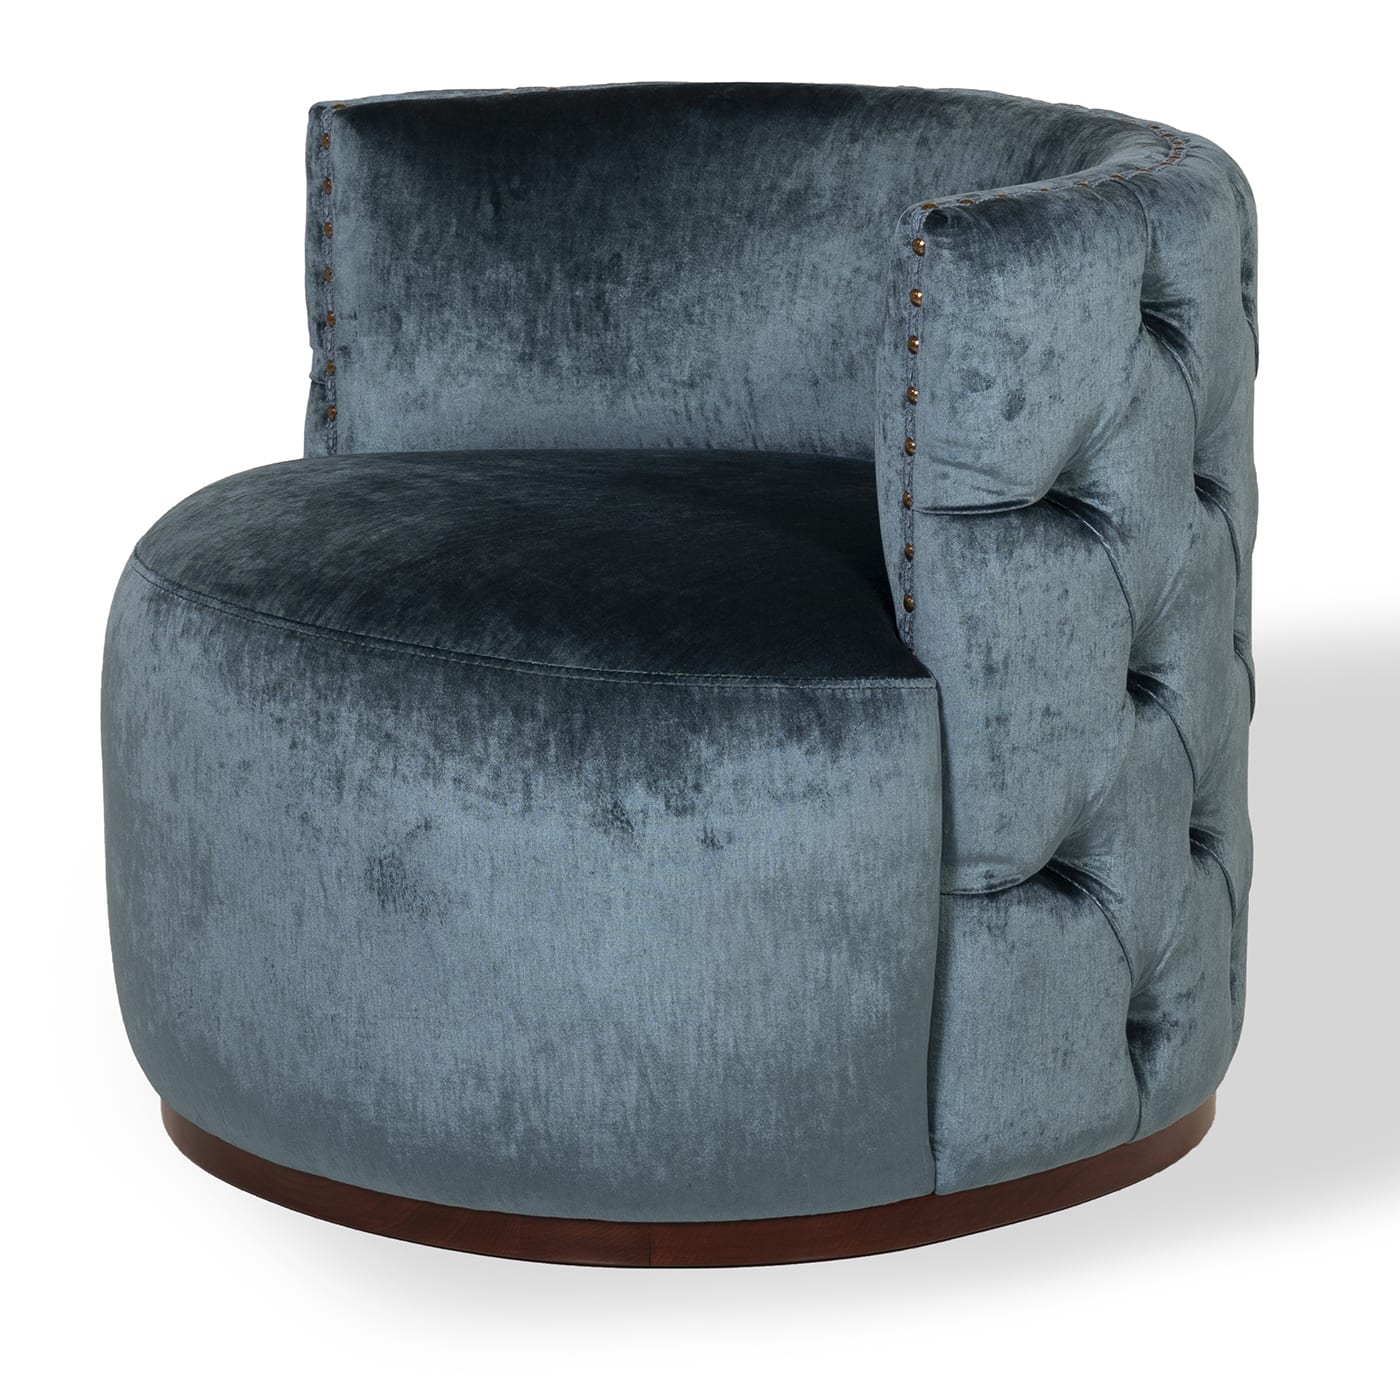 PETRA DARK ARMCHAIR BY MARCO AND GIULIO MANTELLASSI